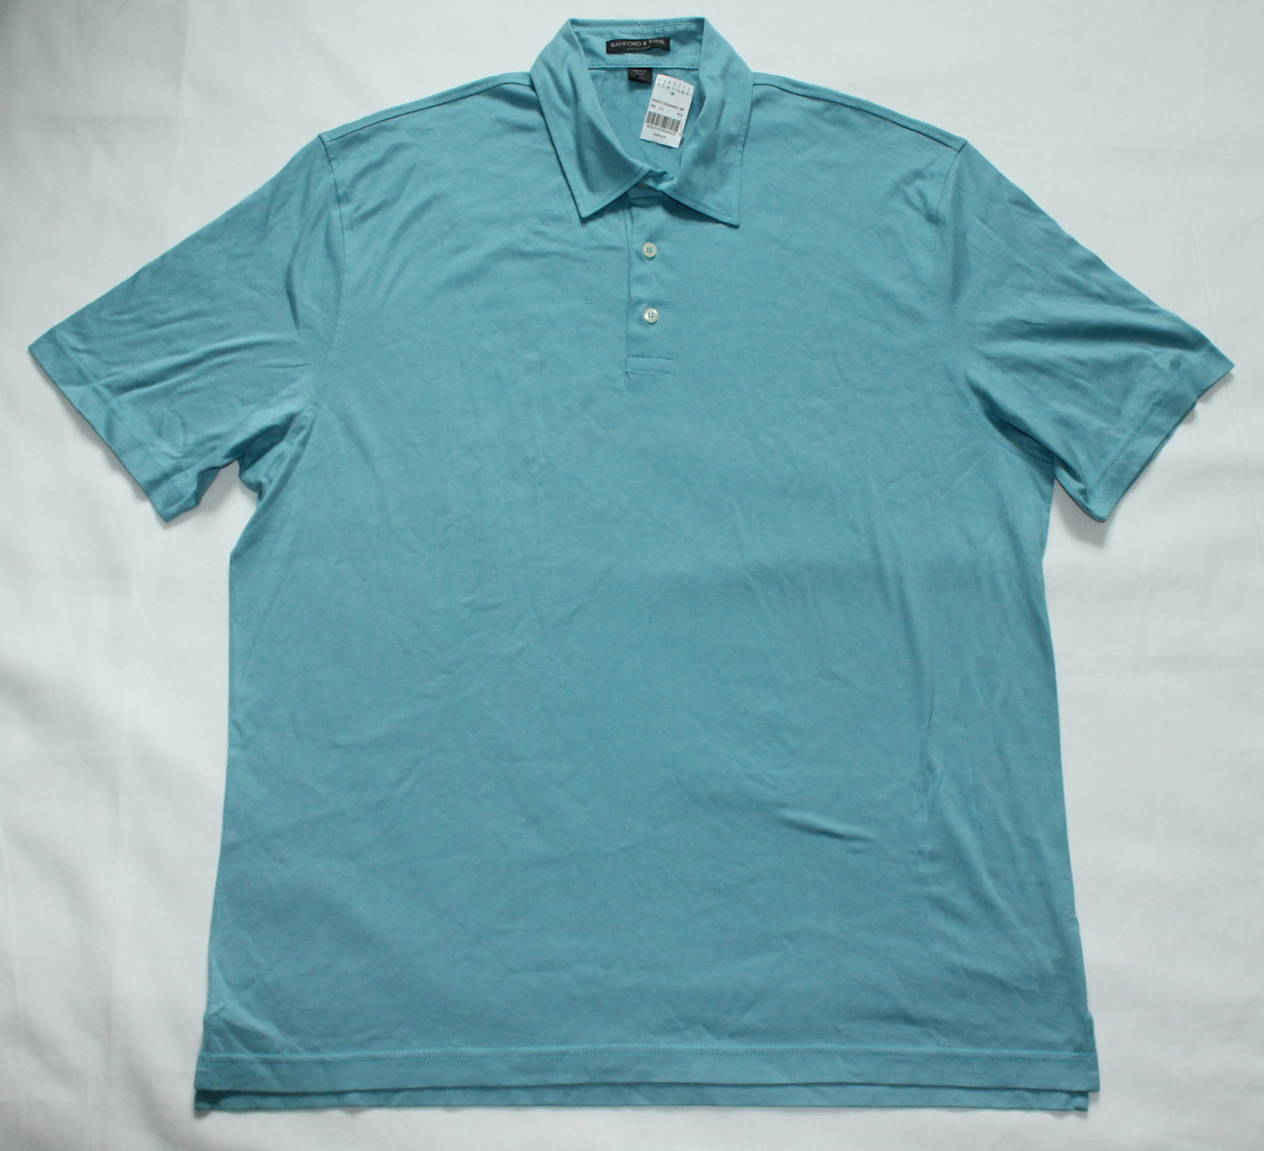 Bamford & Sons. Polo Shirt Size Xxl Cotton Made in Italy, Outletmonster